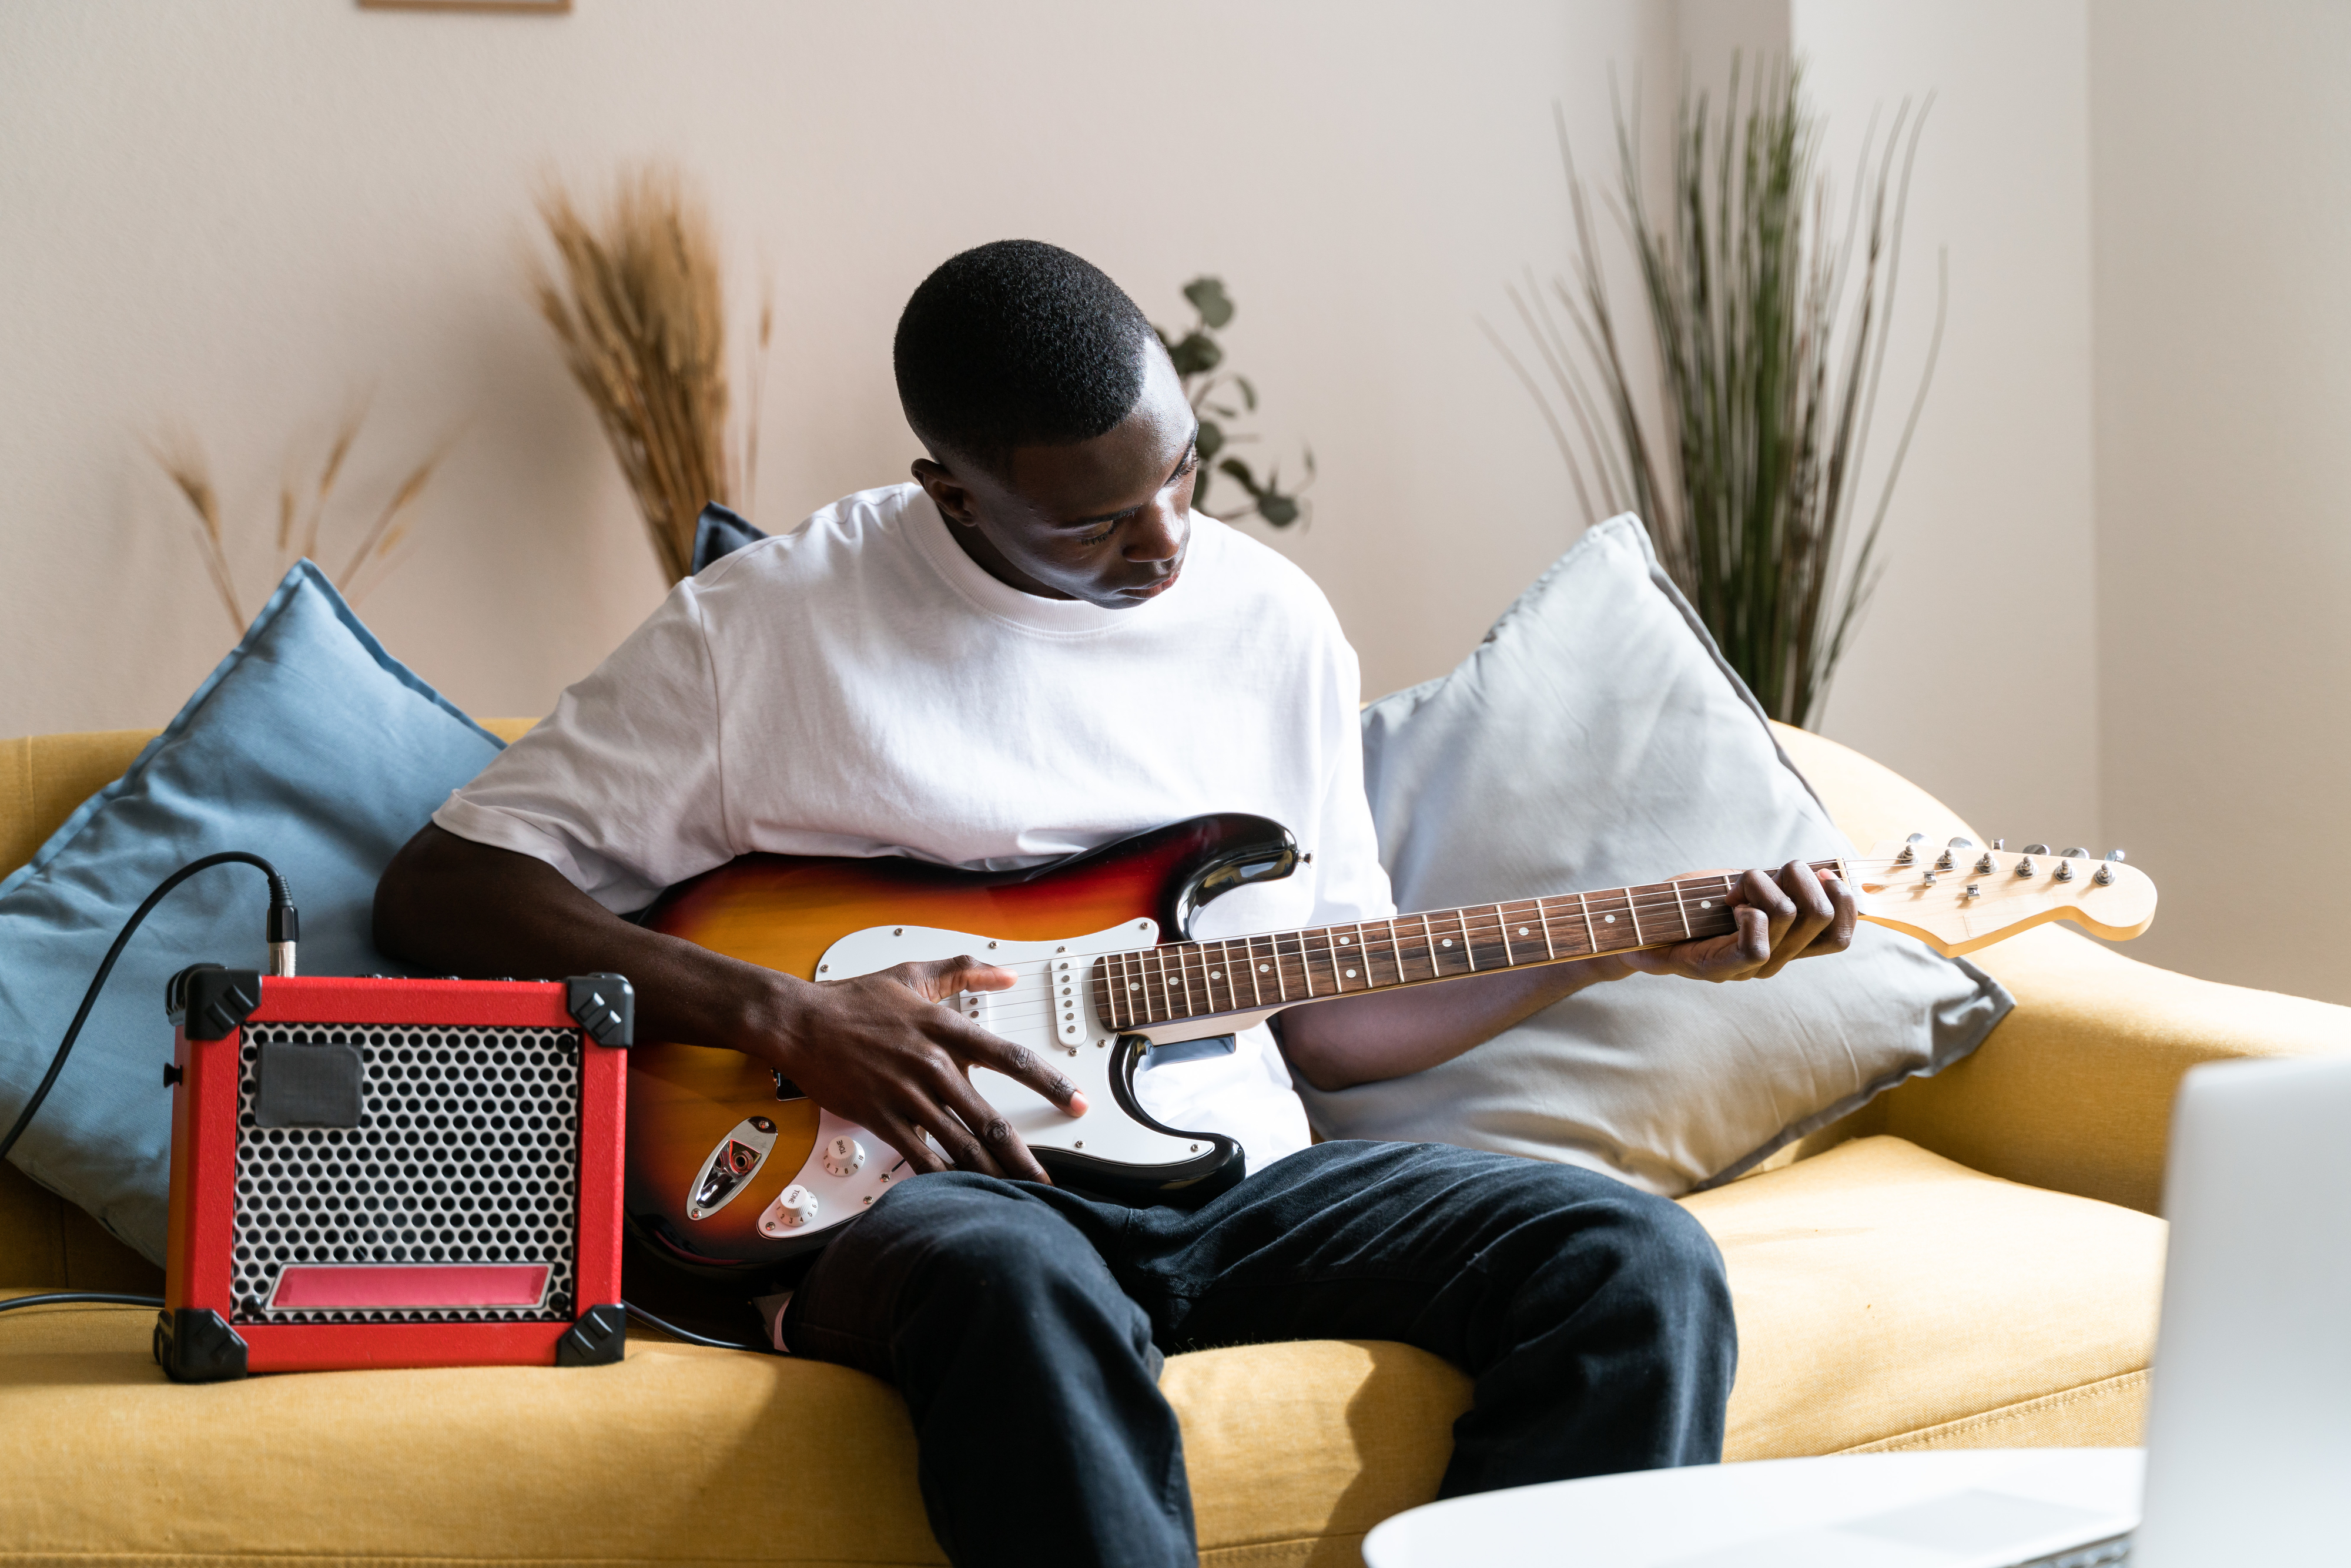 Person playing electric guitar seated on couch with small amplifier nearby